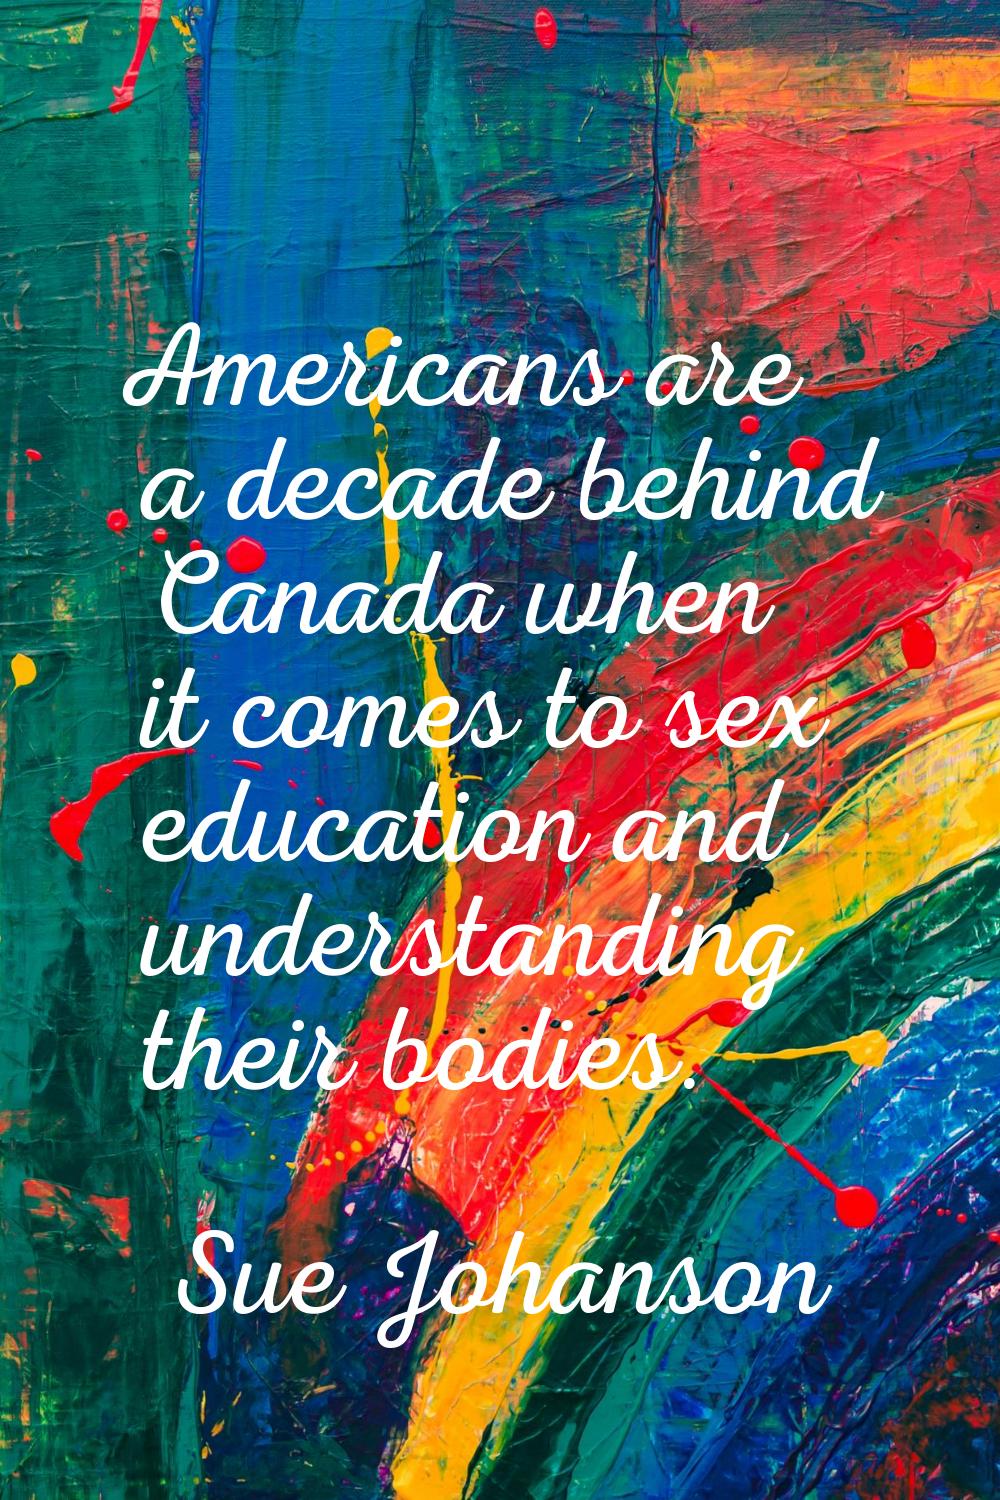 Americans are a decade behind Canada when it comes to sex education and understanding their bodies.